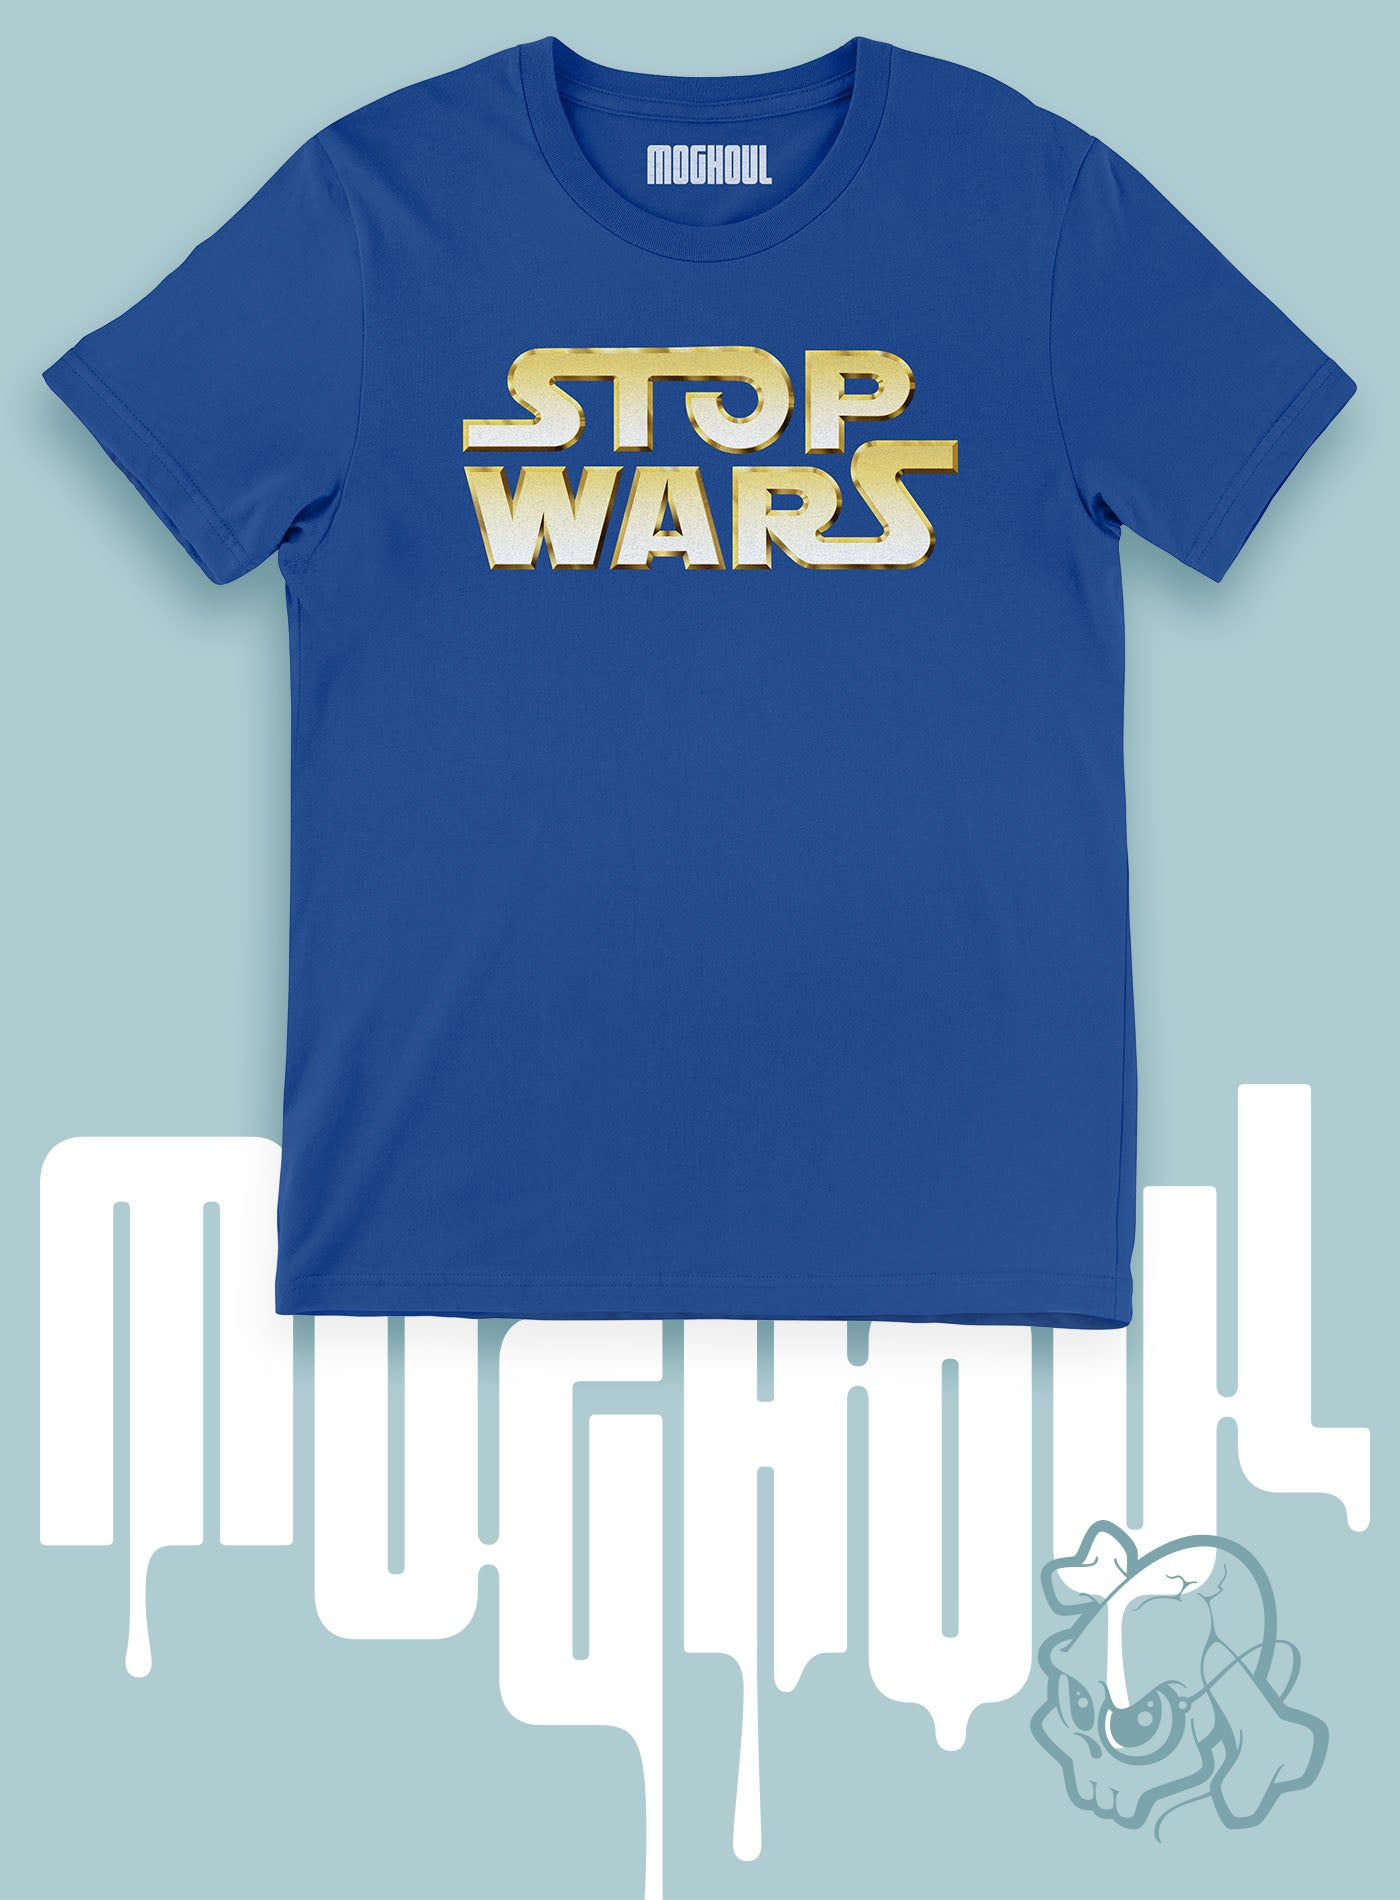 man royal blue unisex t-shirt featuring a front print demanding to stop wars